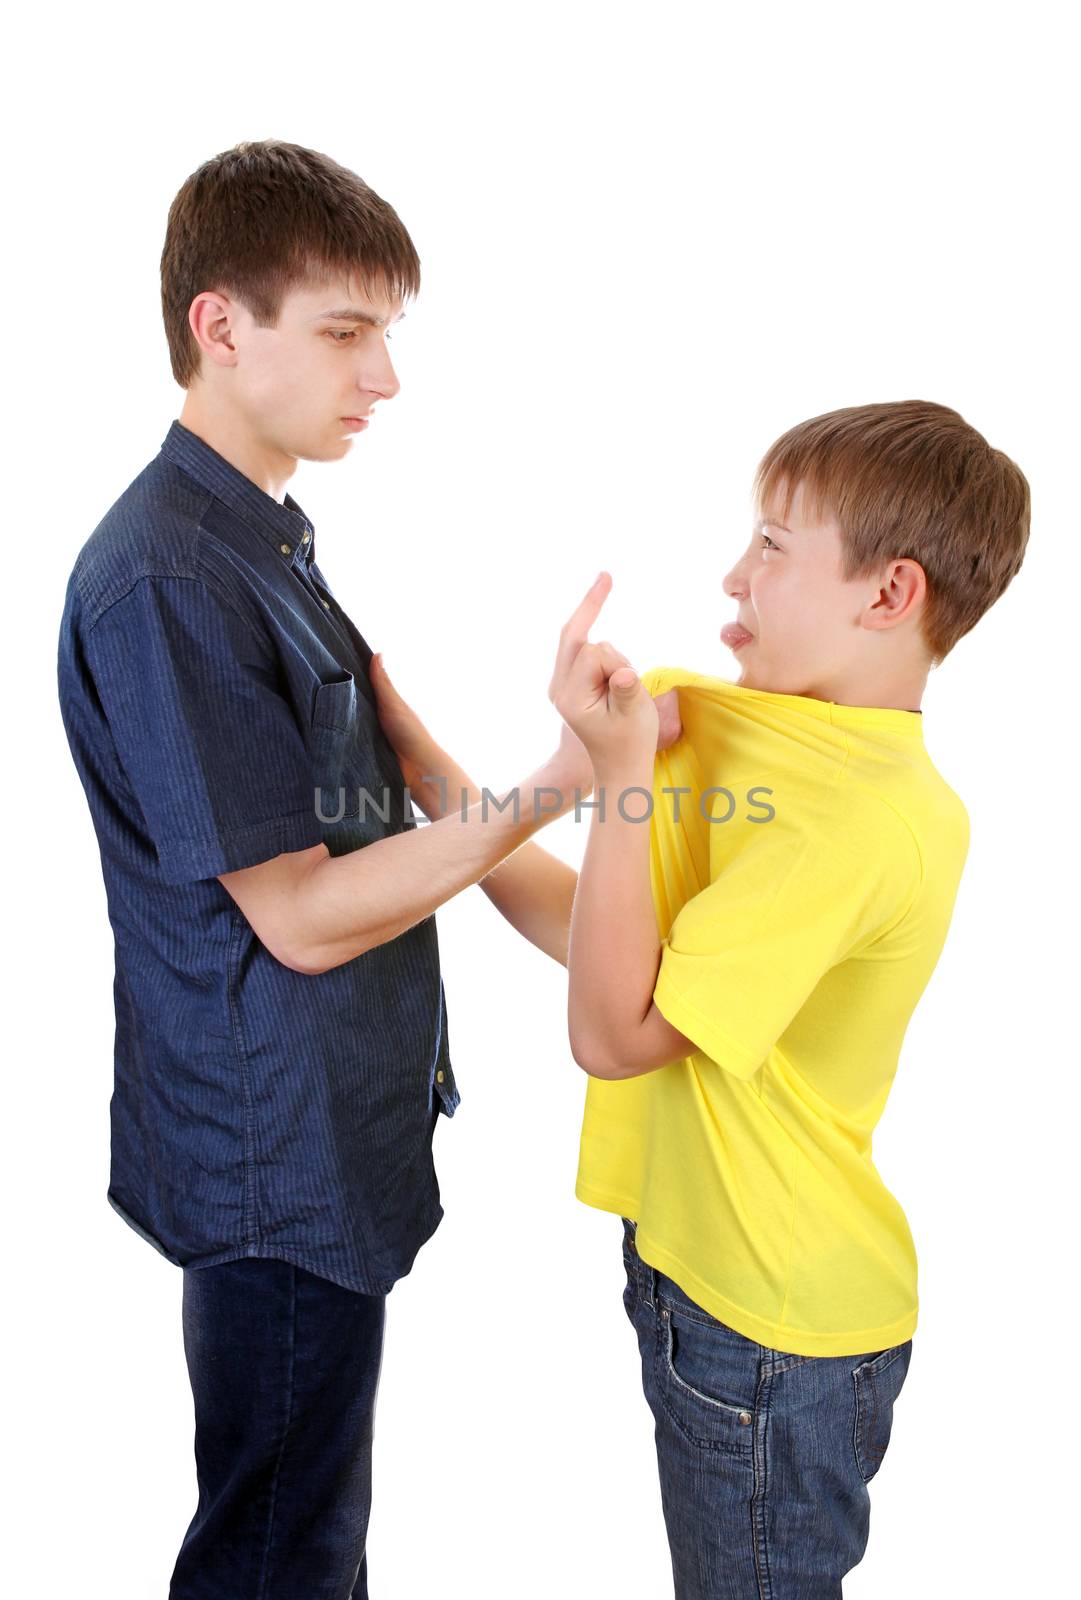 Teenager threaten a Naughty Kid on the White Background